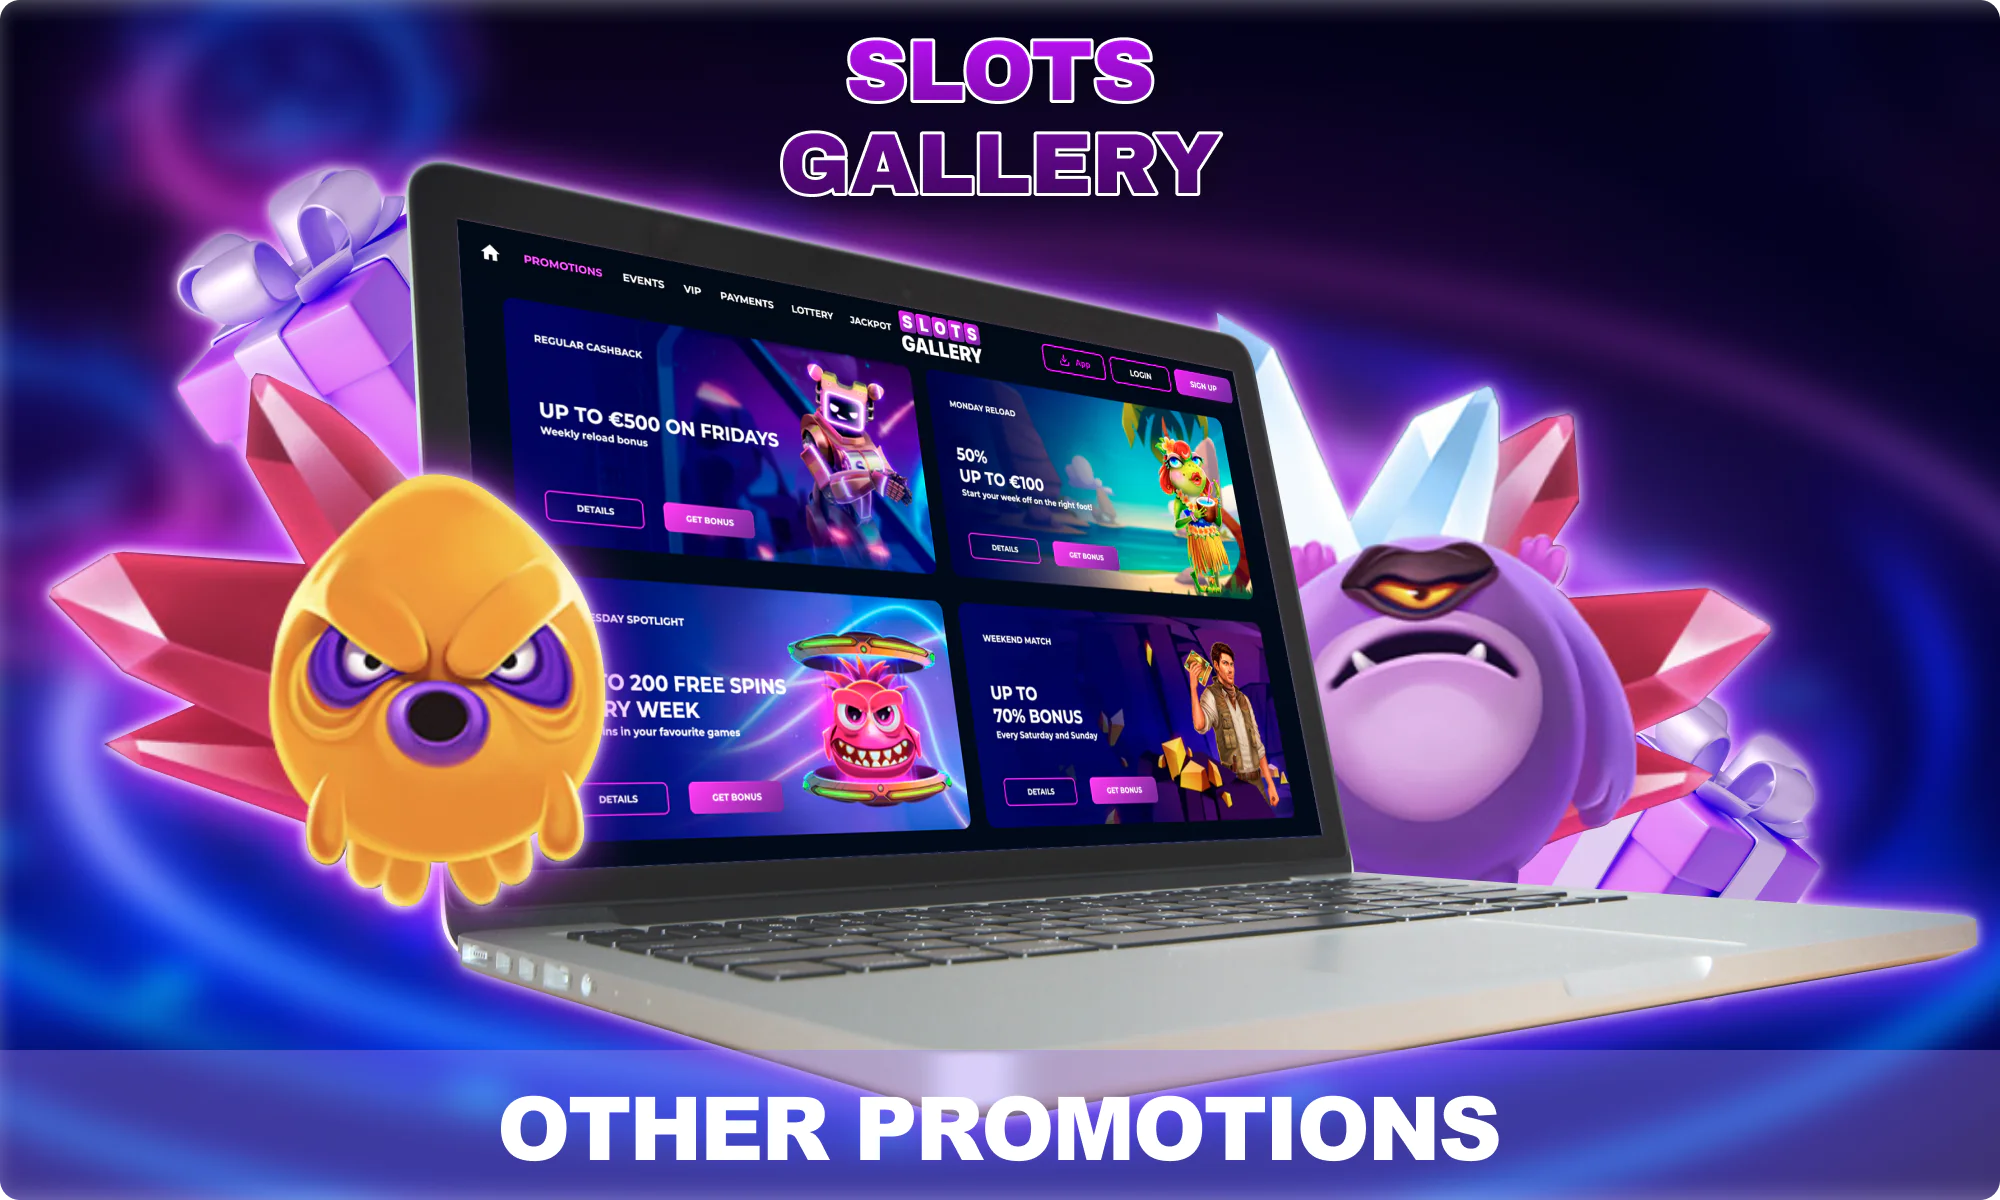 More Slots Gallery promotions and bonuses for players